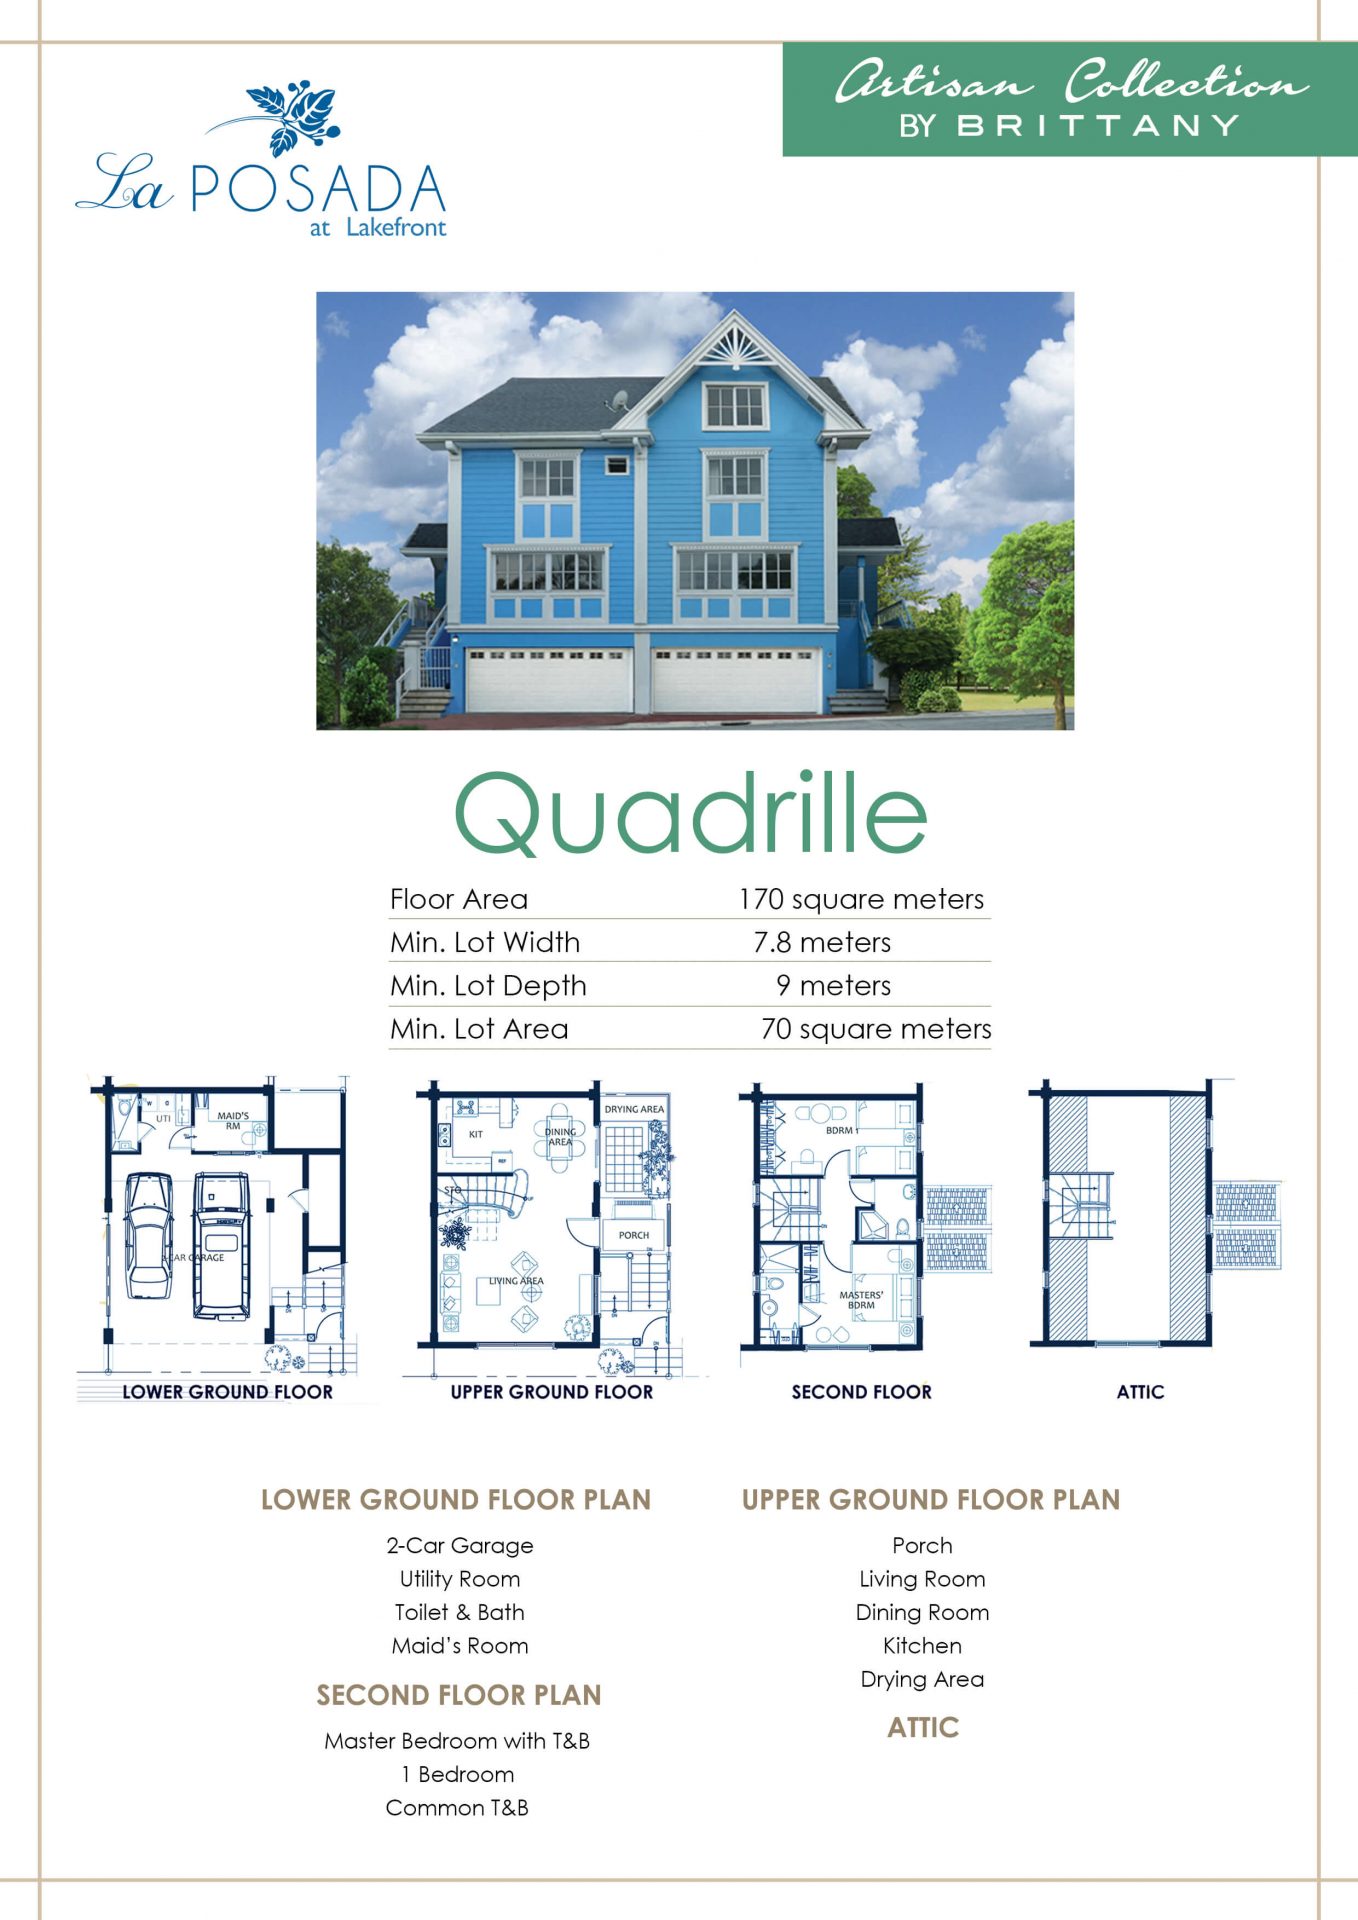 Vista Alabang | La Posada | Quadrille House Model Infographic | Luxury Homes by Brittany Corporation